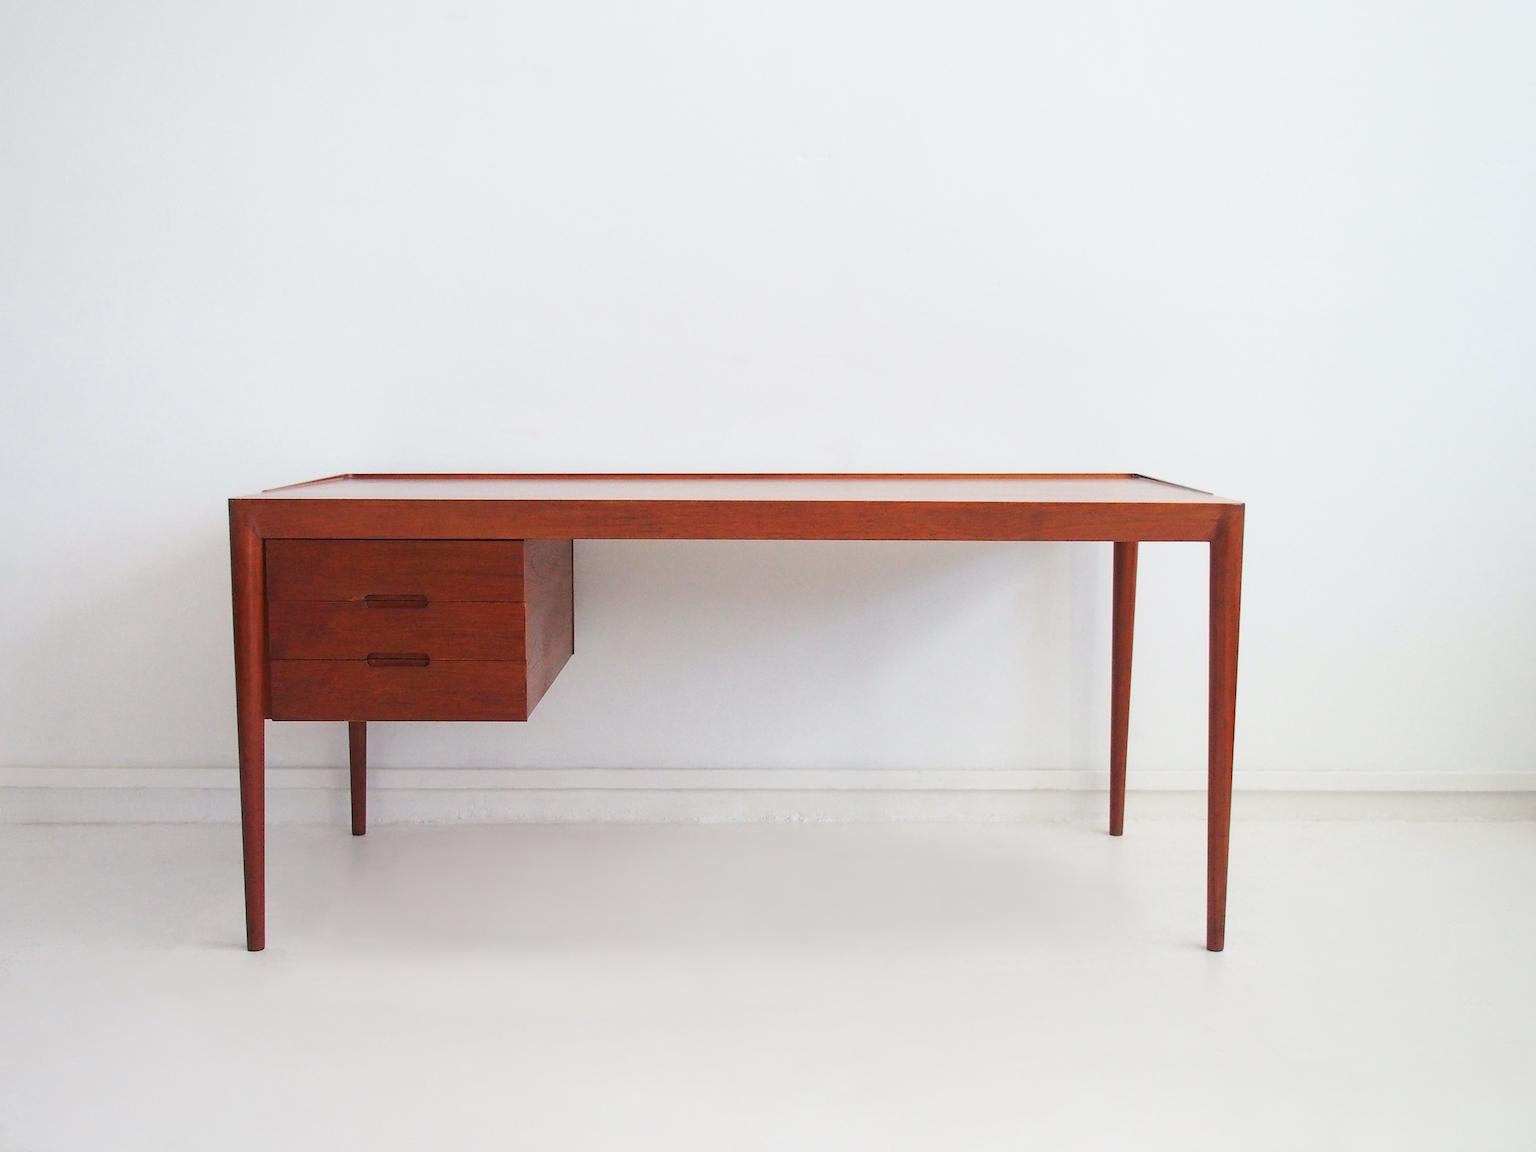 Teak wood desk with scalloped edge on the back. Designed by Erik Riisager Hansen and manufactured by Haslev Møbelsnedkeri, model 66.
Slim tapered legs. Drawer section with three drawers.